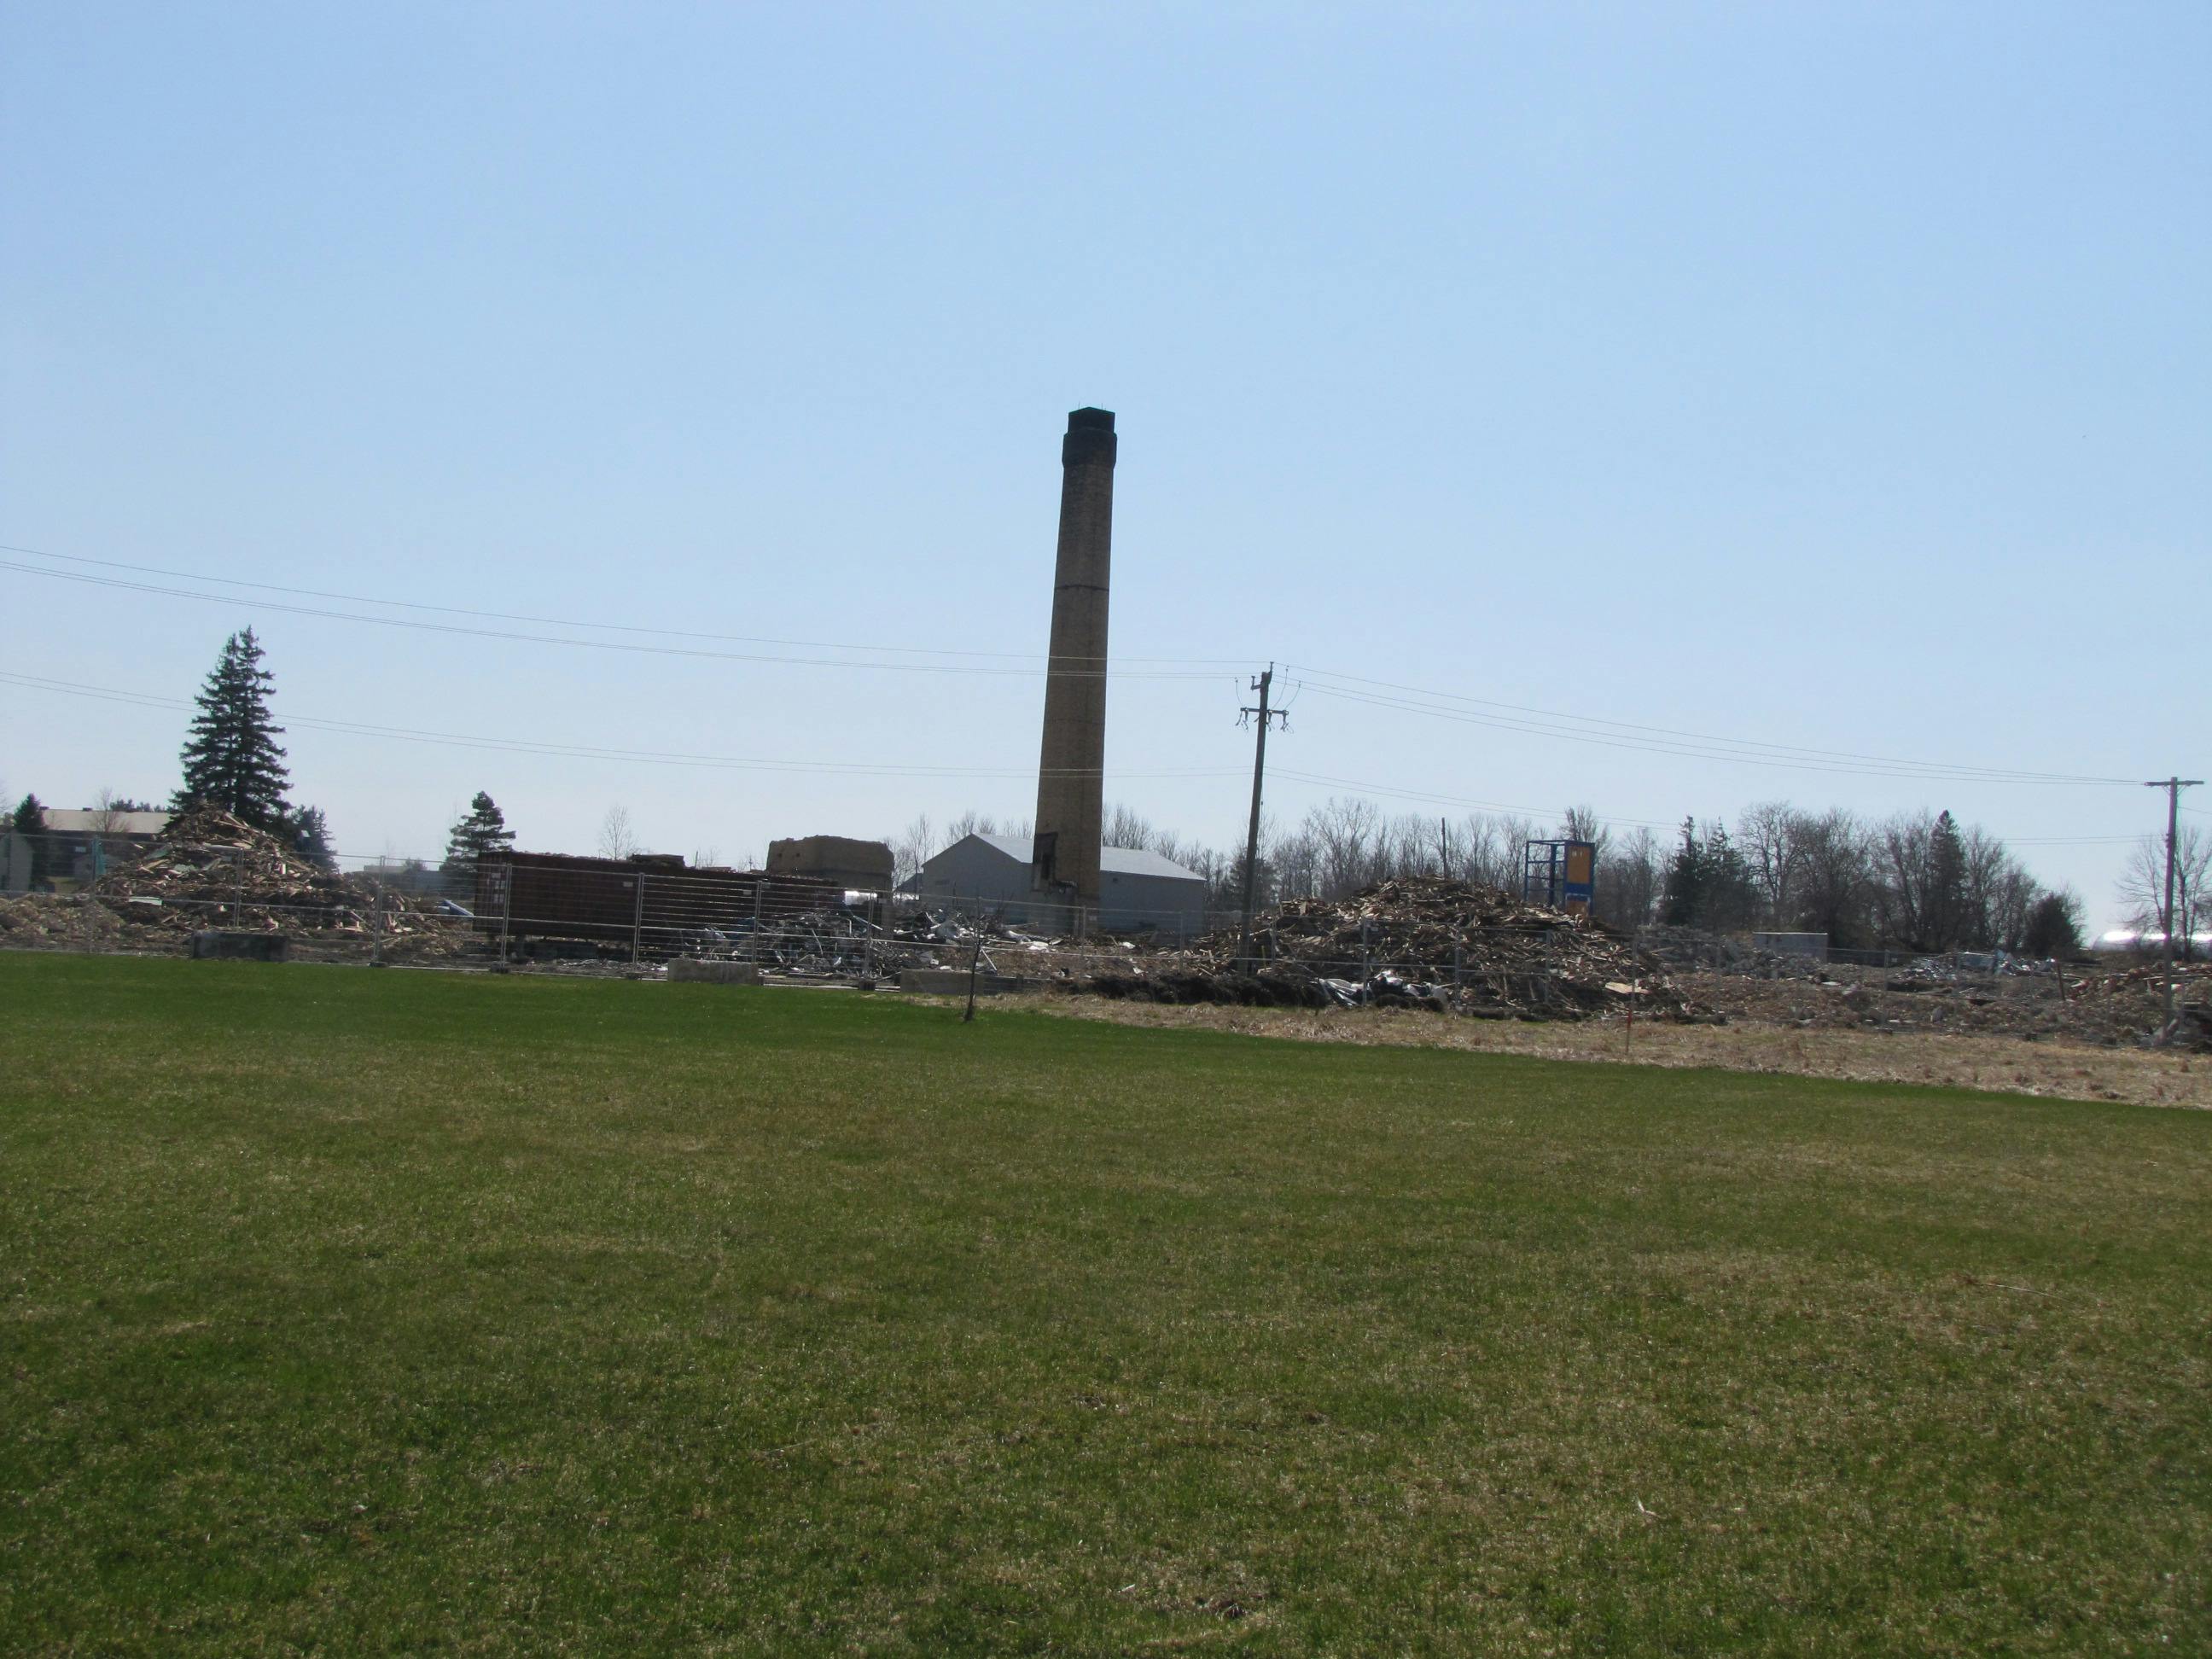 Demolition of Bogdon and Gross - March 30, 2021